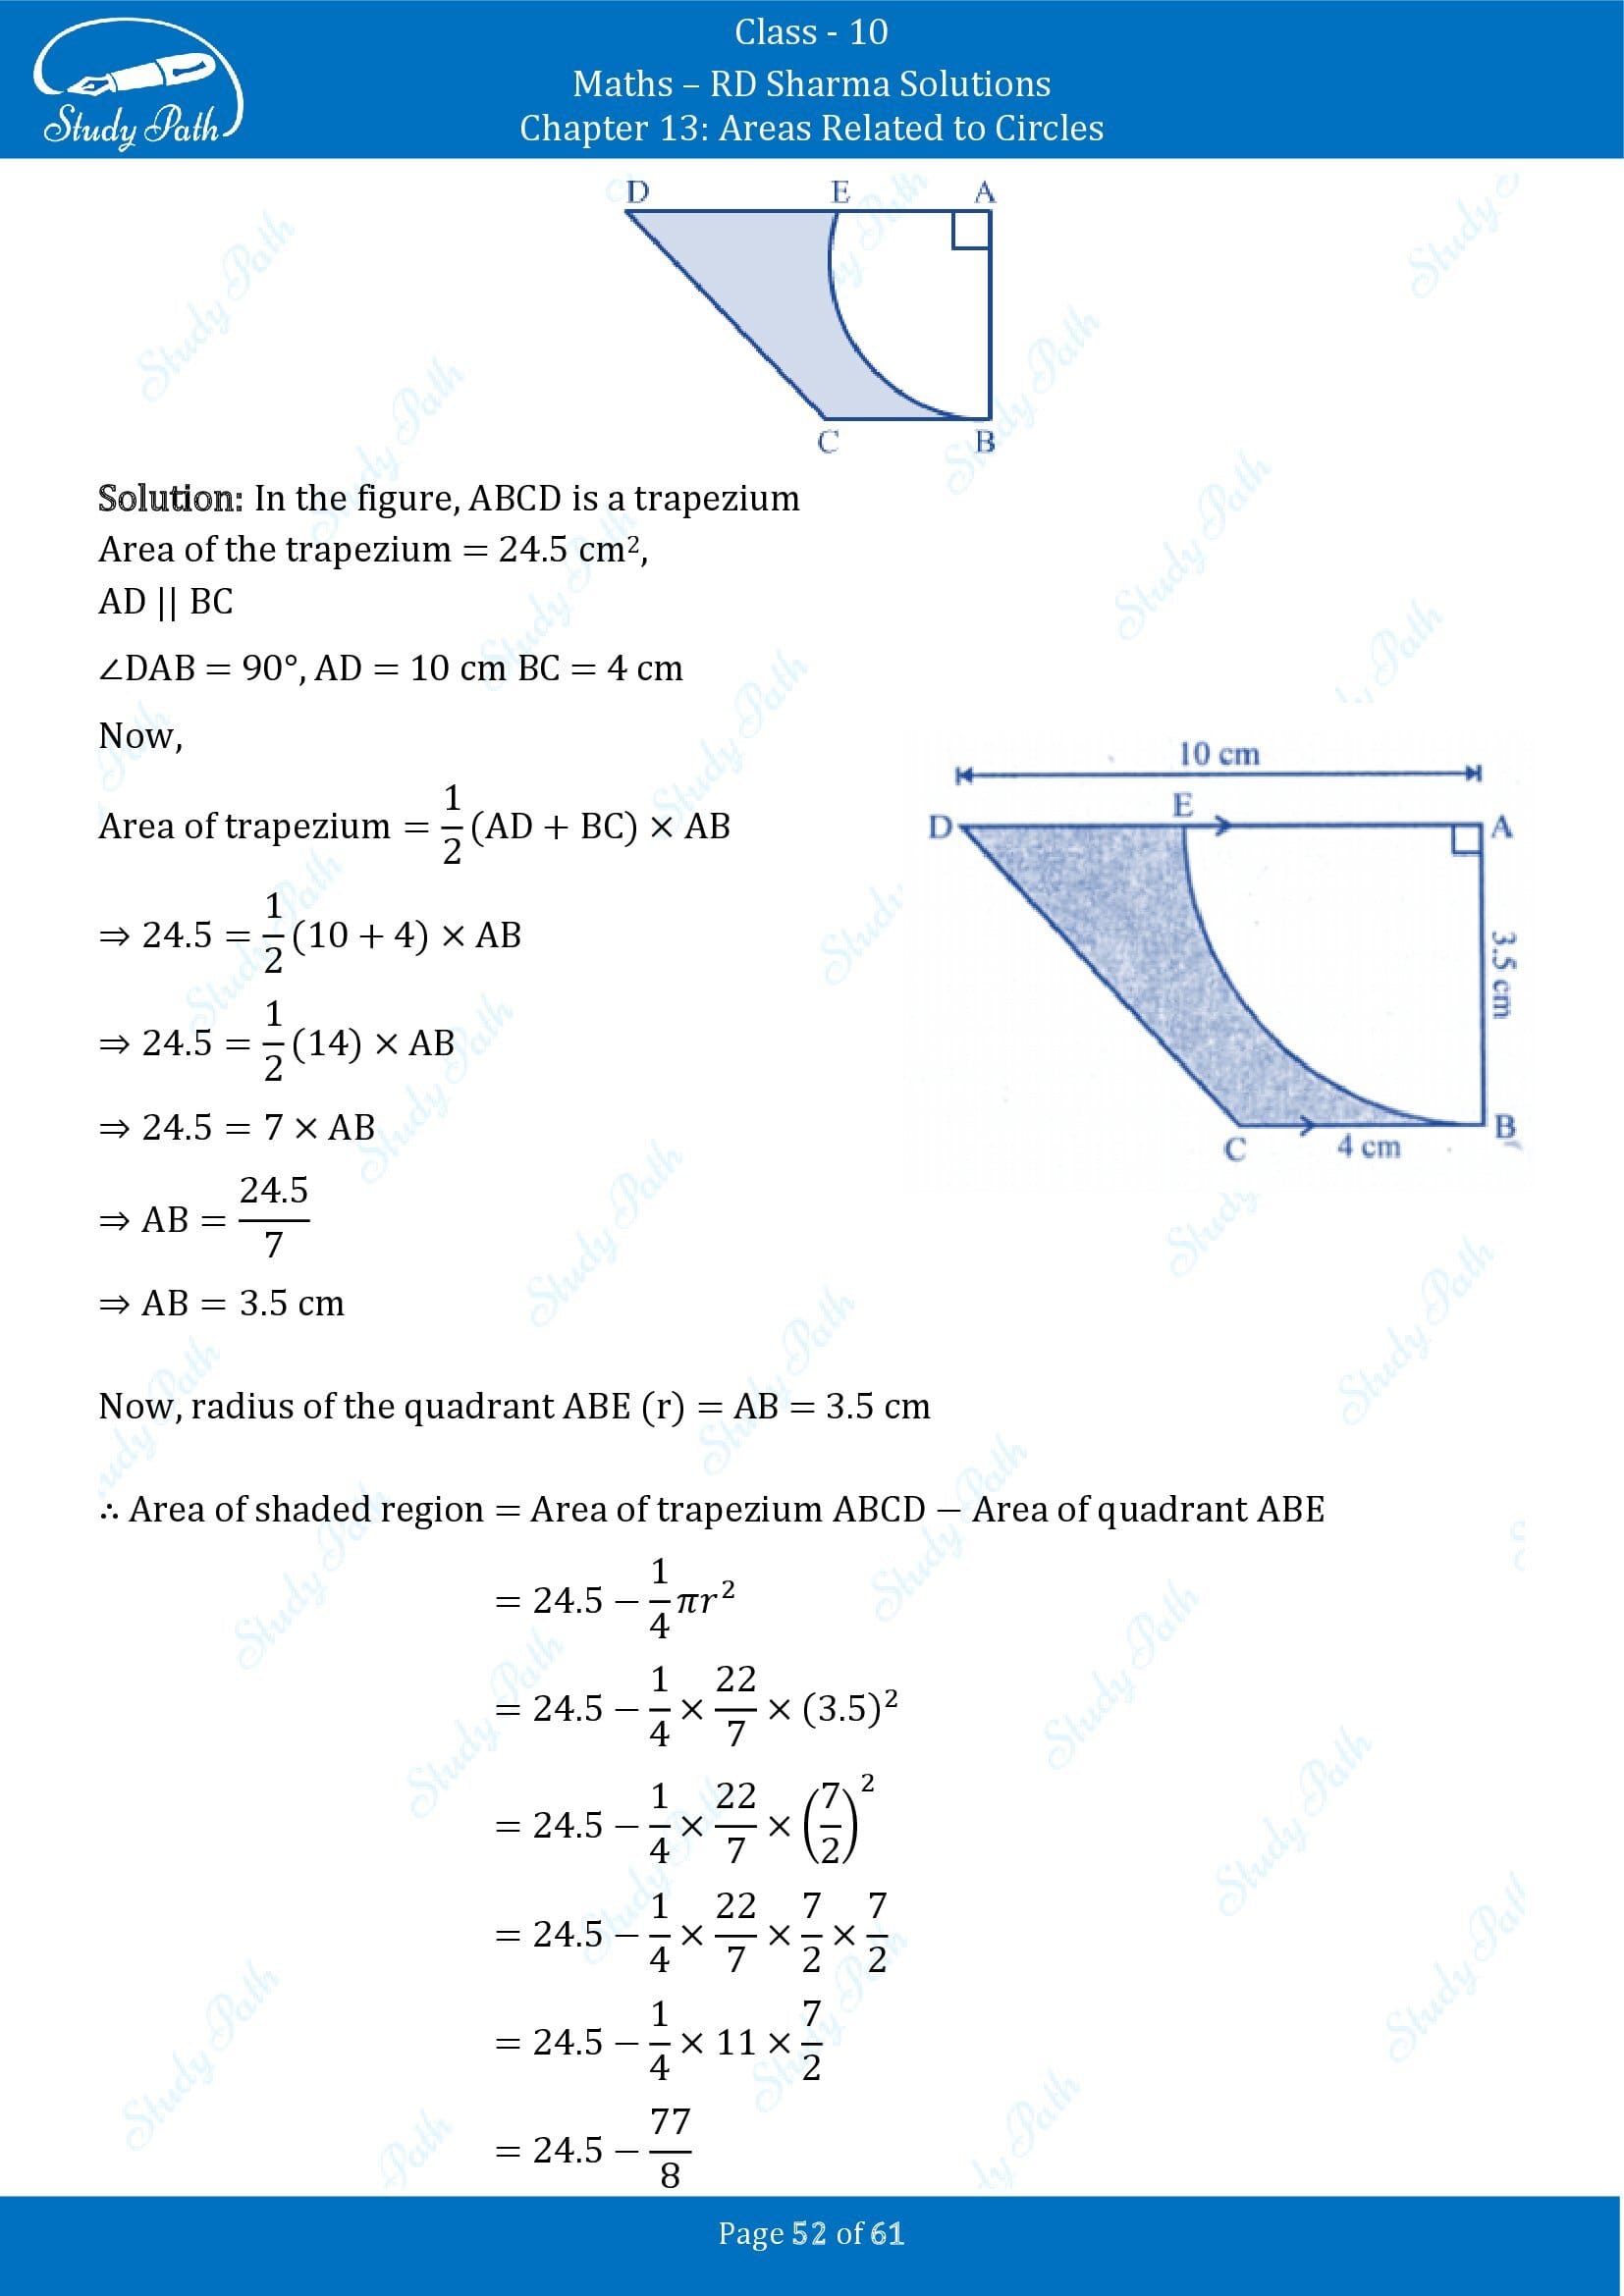 RD Sharma Solutions Class 10 Chapter 13 Areas Related to Circles Exercise 13.4 00052